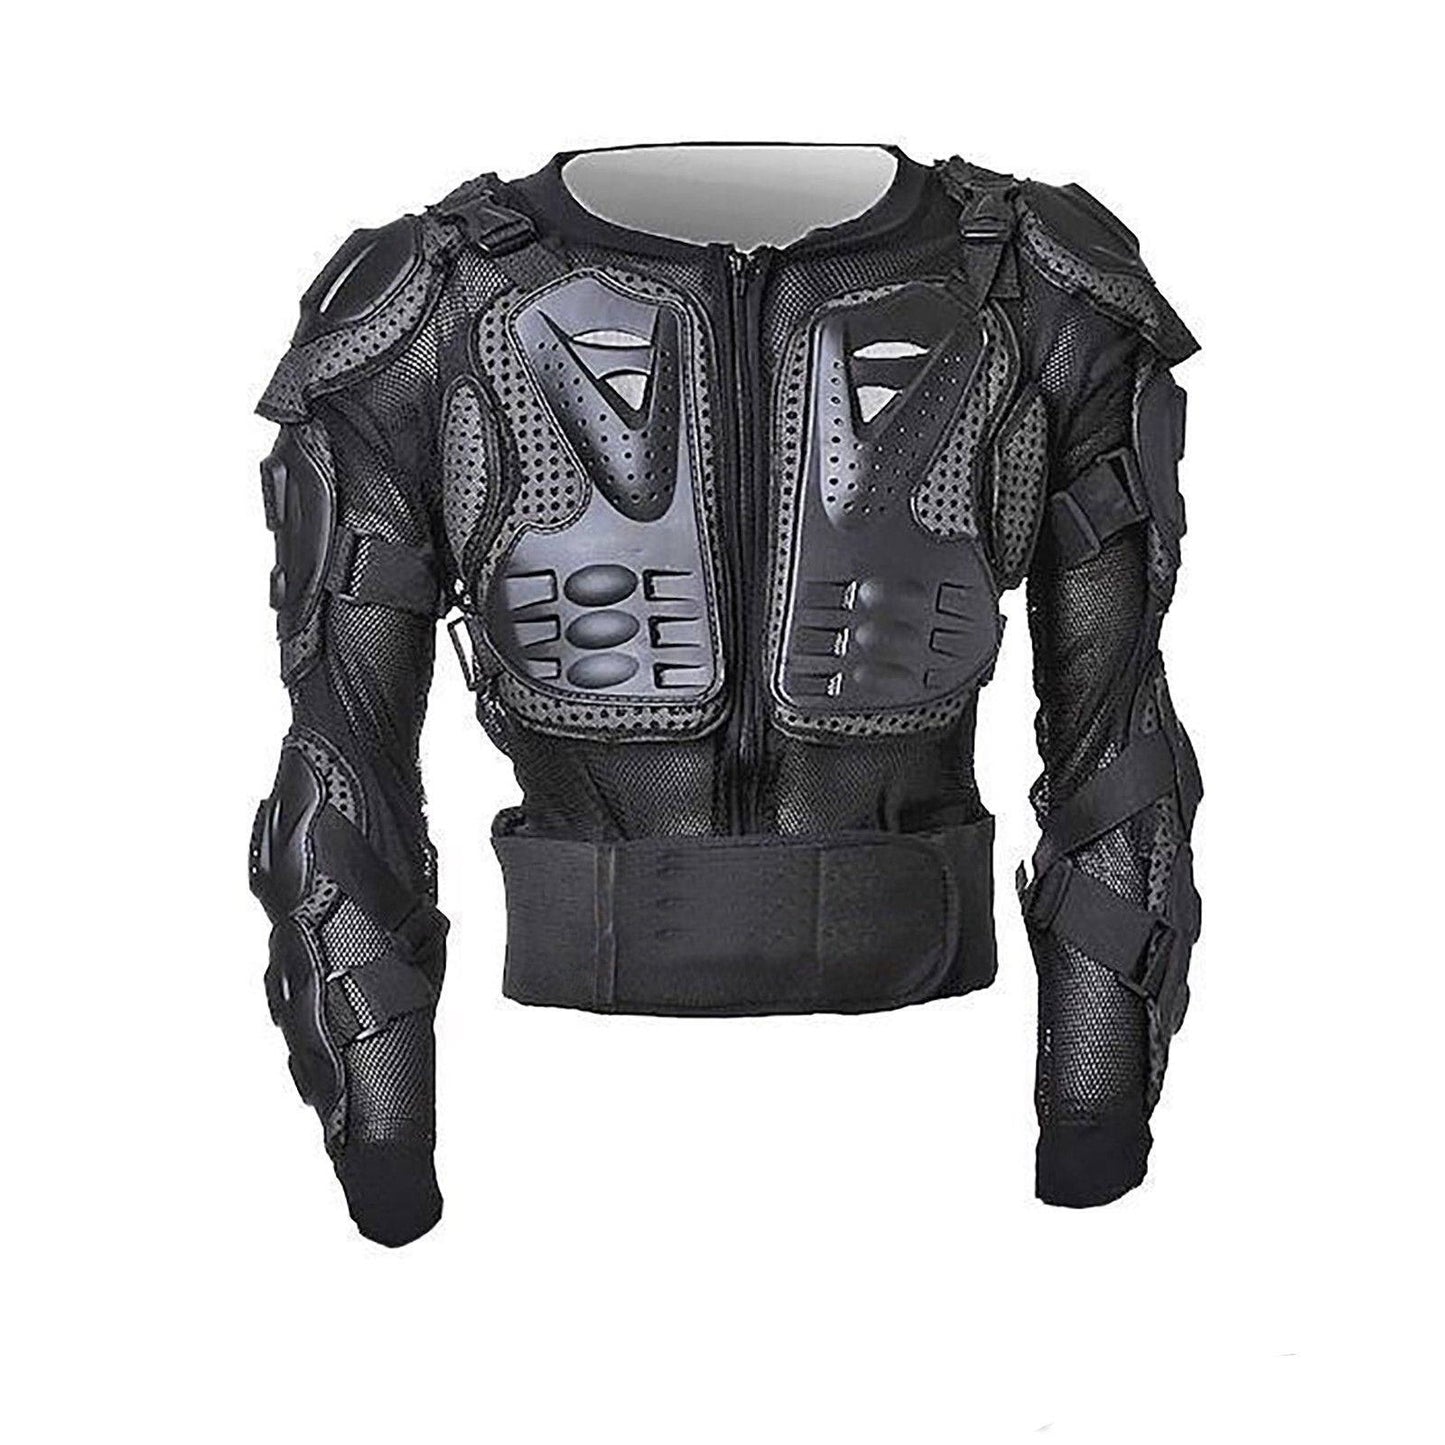 Body Armour Jacket Motorcycle Protection